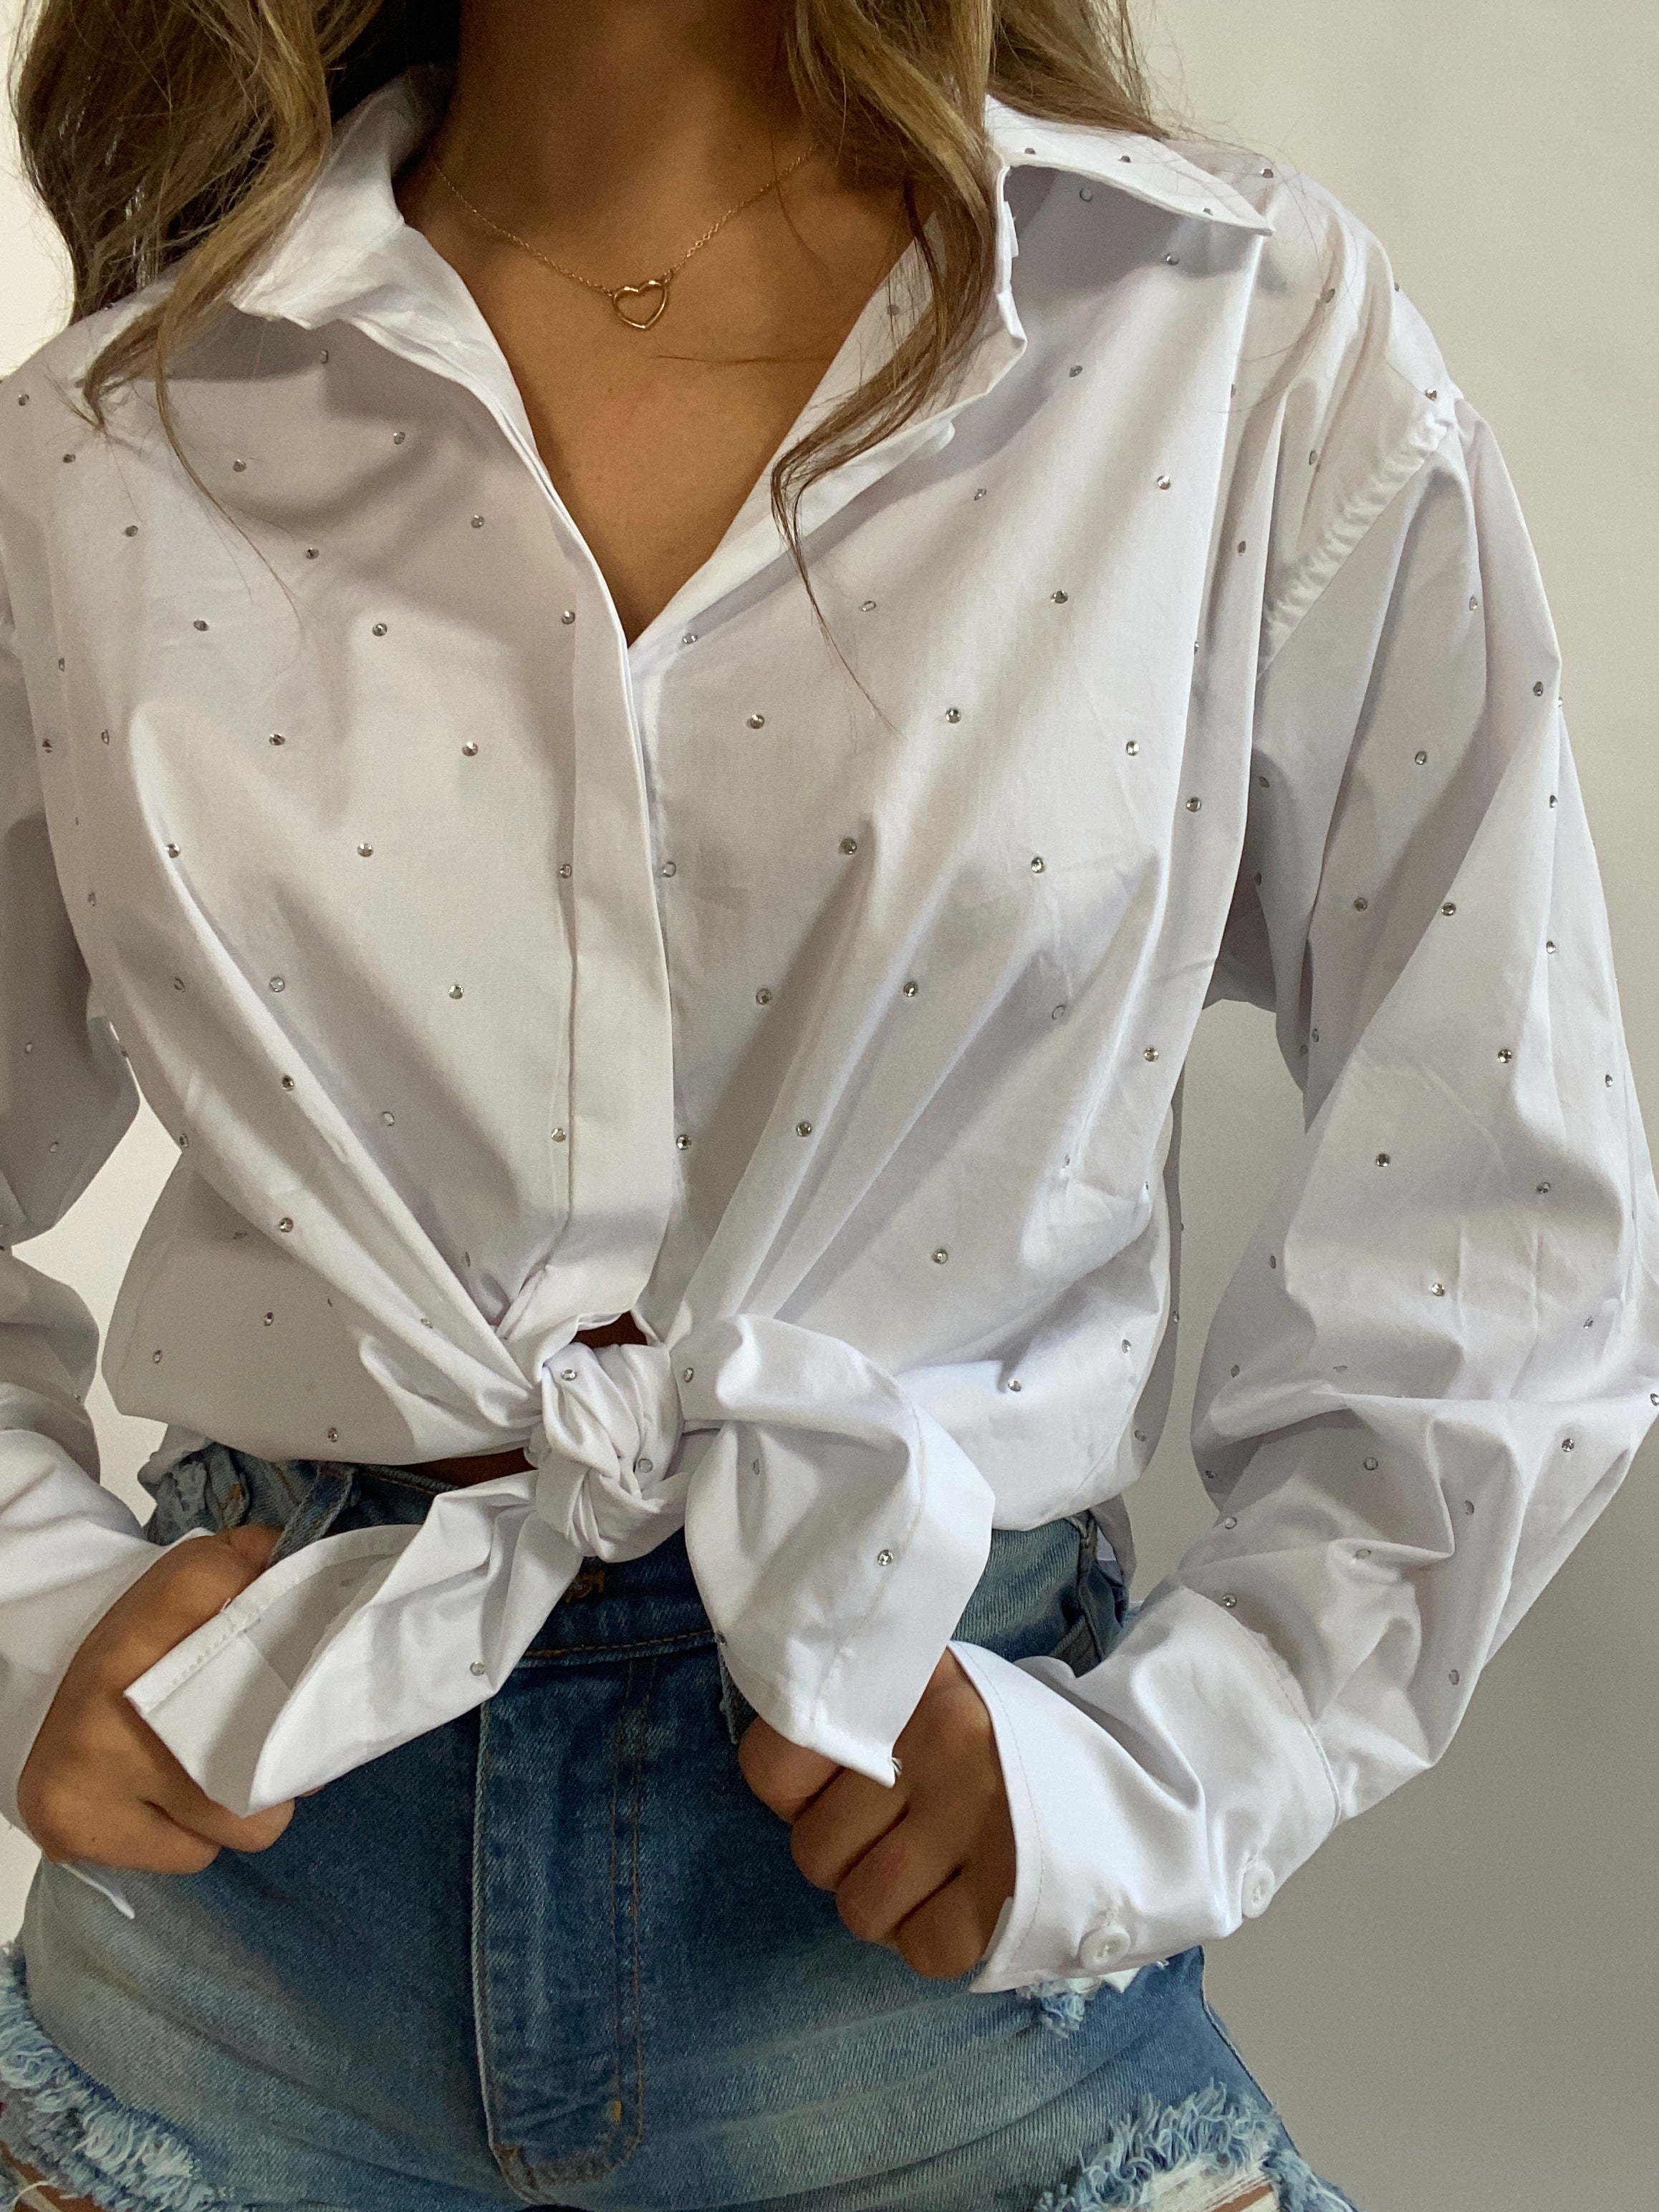 Means Business Rhinestone Button Up